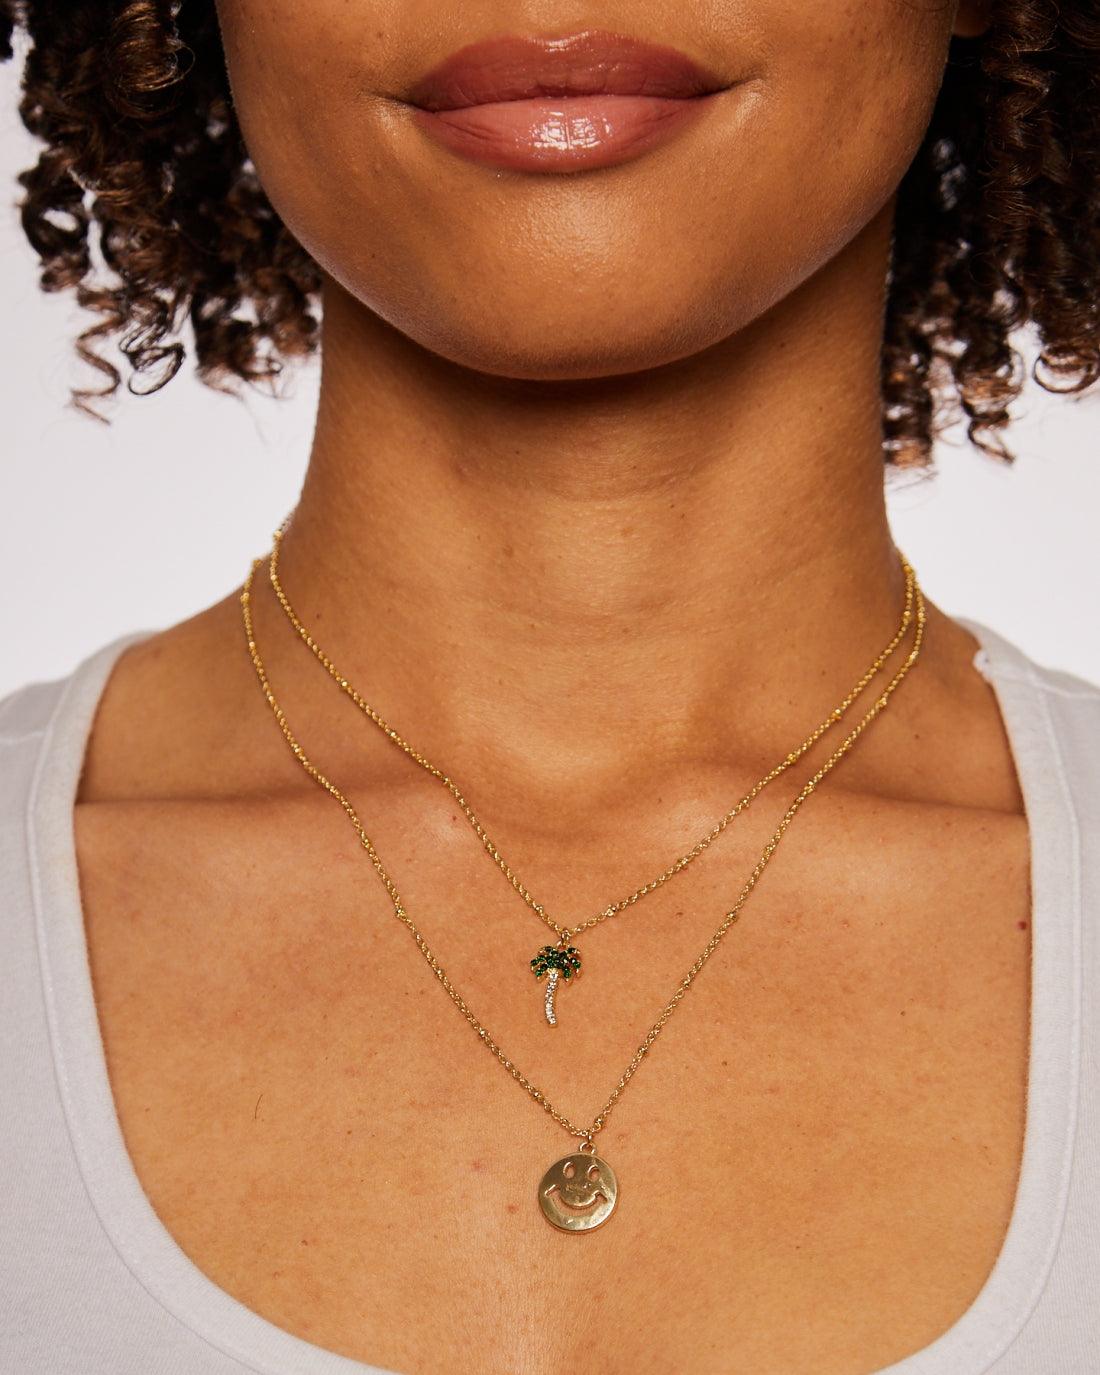 CALIFORNIA LOVE NECKLACE - 8 Other Reasons